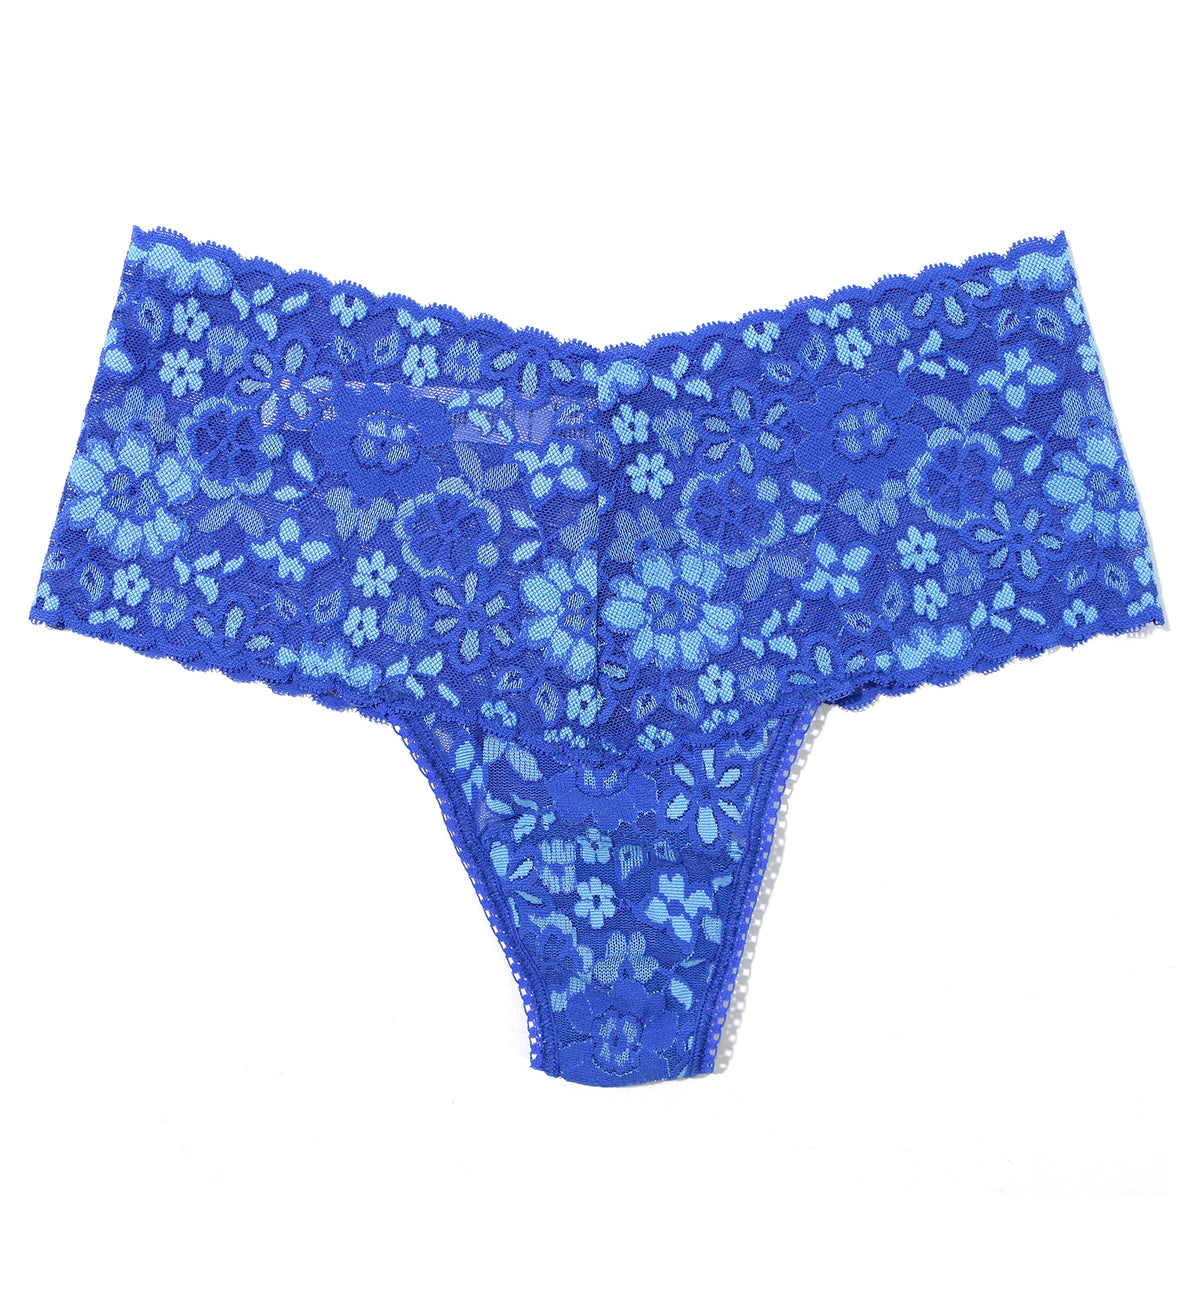 Hanky Panky Daily Lace Cross-Dye High-Waist Retro Thong (791924),Blueberries/Butterfly - Blueberries/Butterfly,One Size